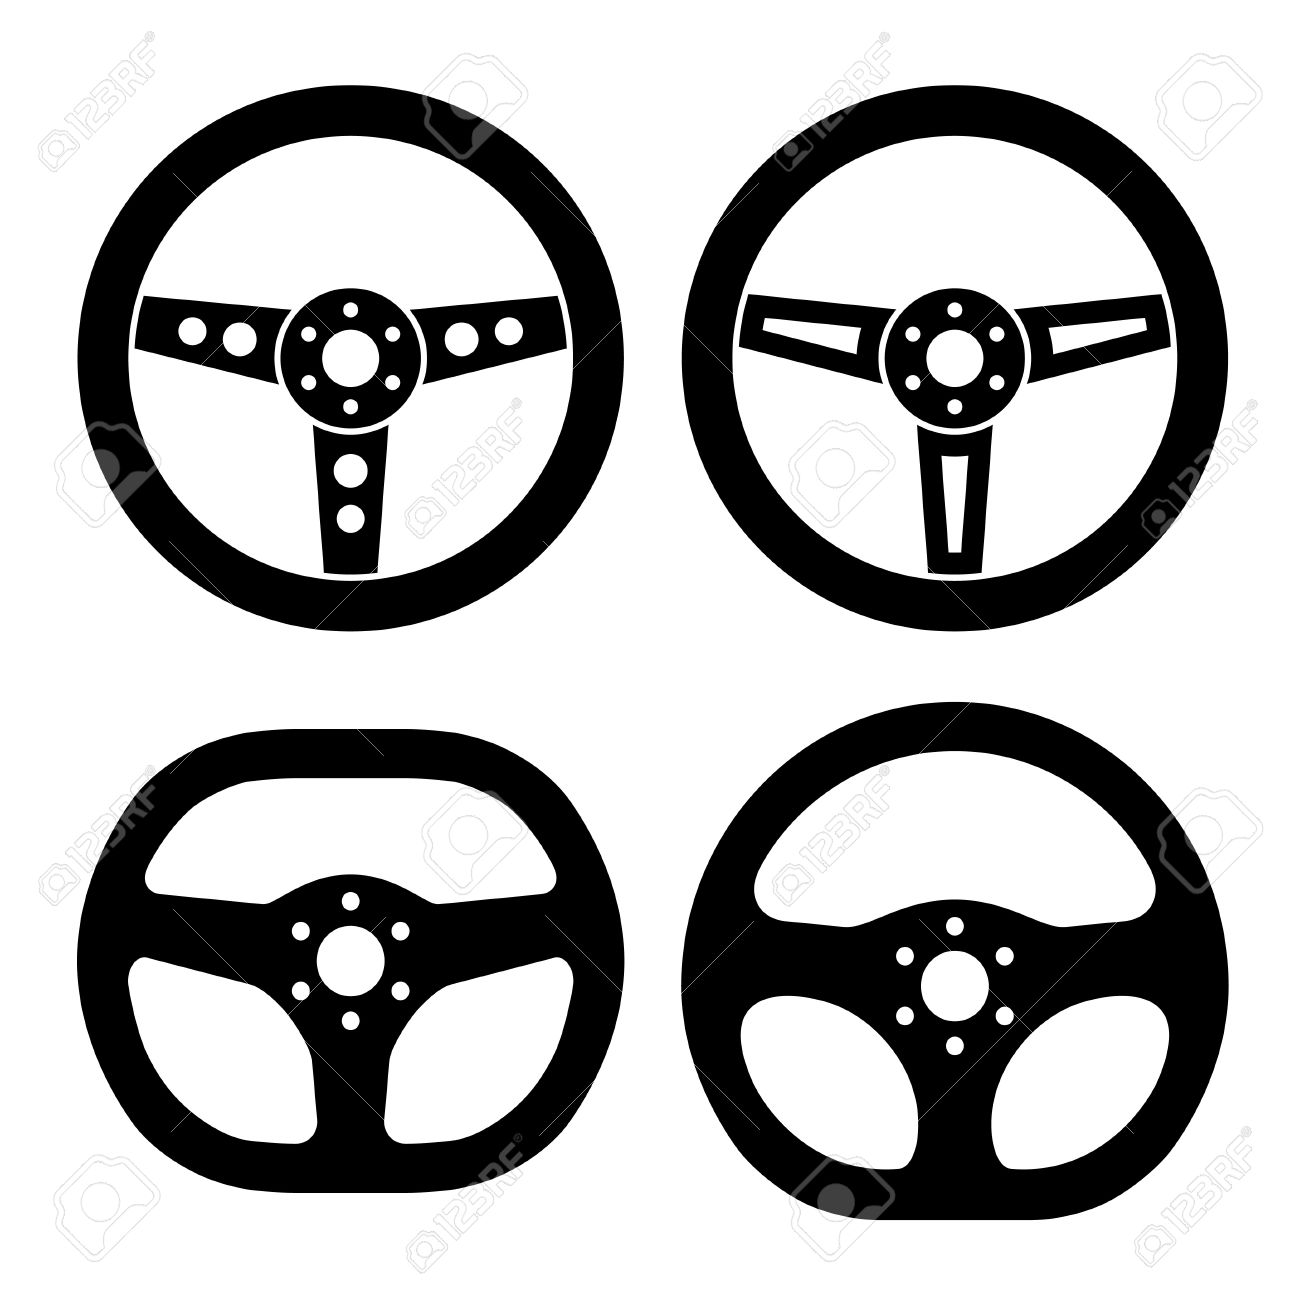 14,293 Steering Wheel Stock Illustrations, Cliparts And Royalty.